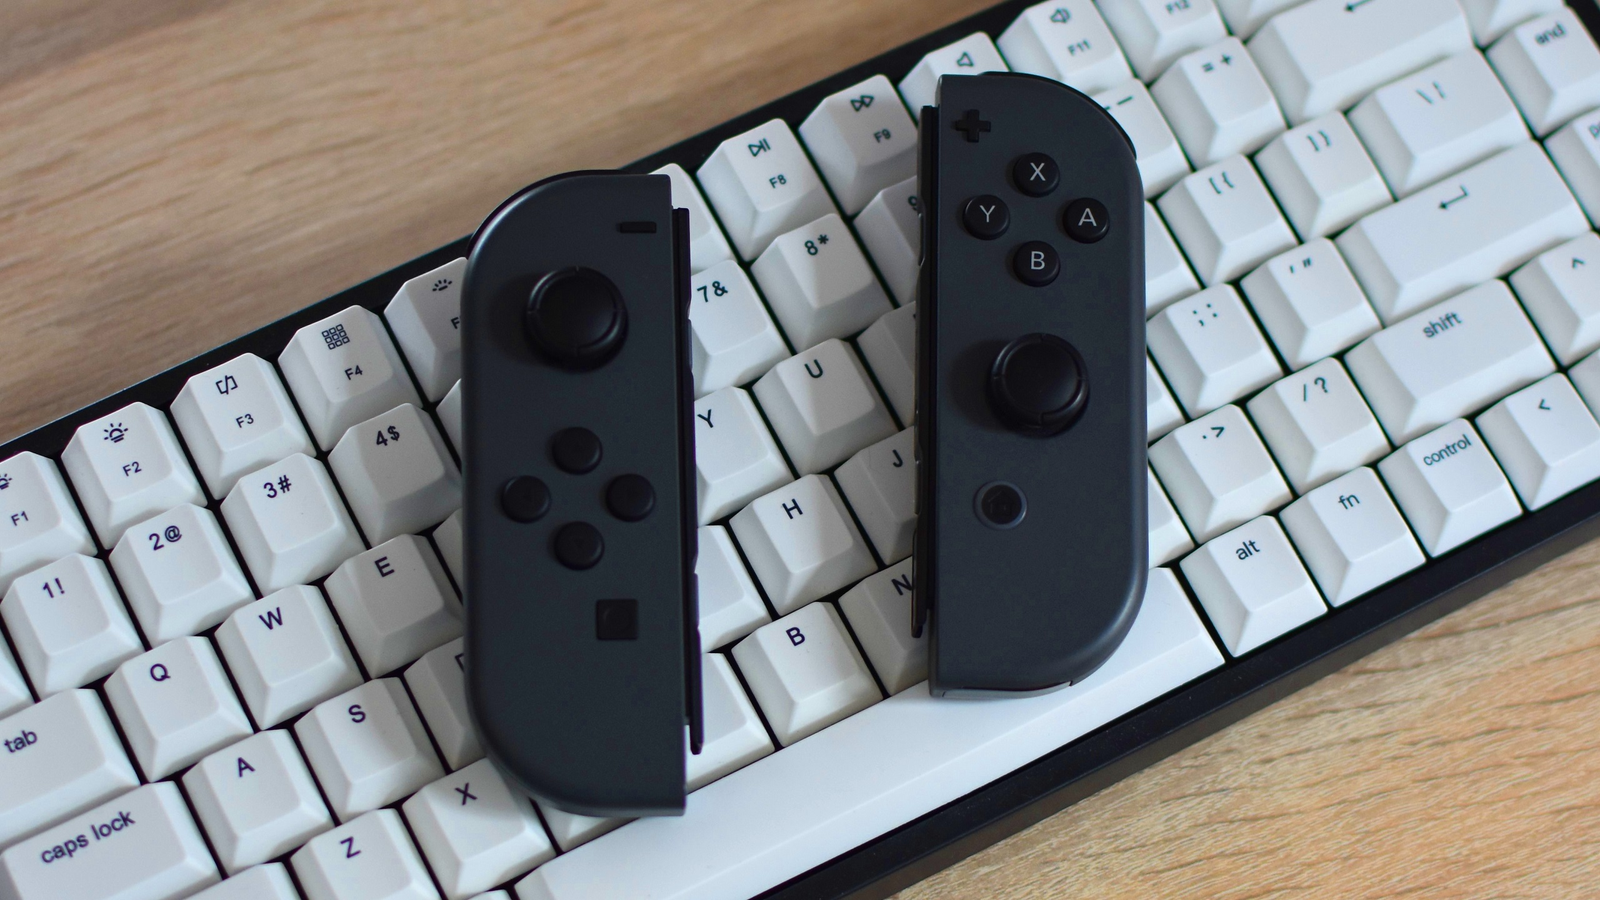 You Can Easily Use Nintendo Switch Joy-Cons To Game On PC, Mac and Android  Devices